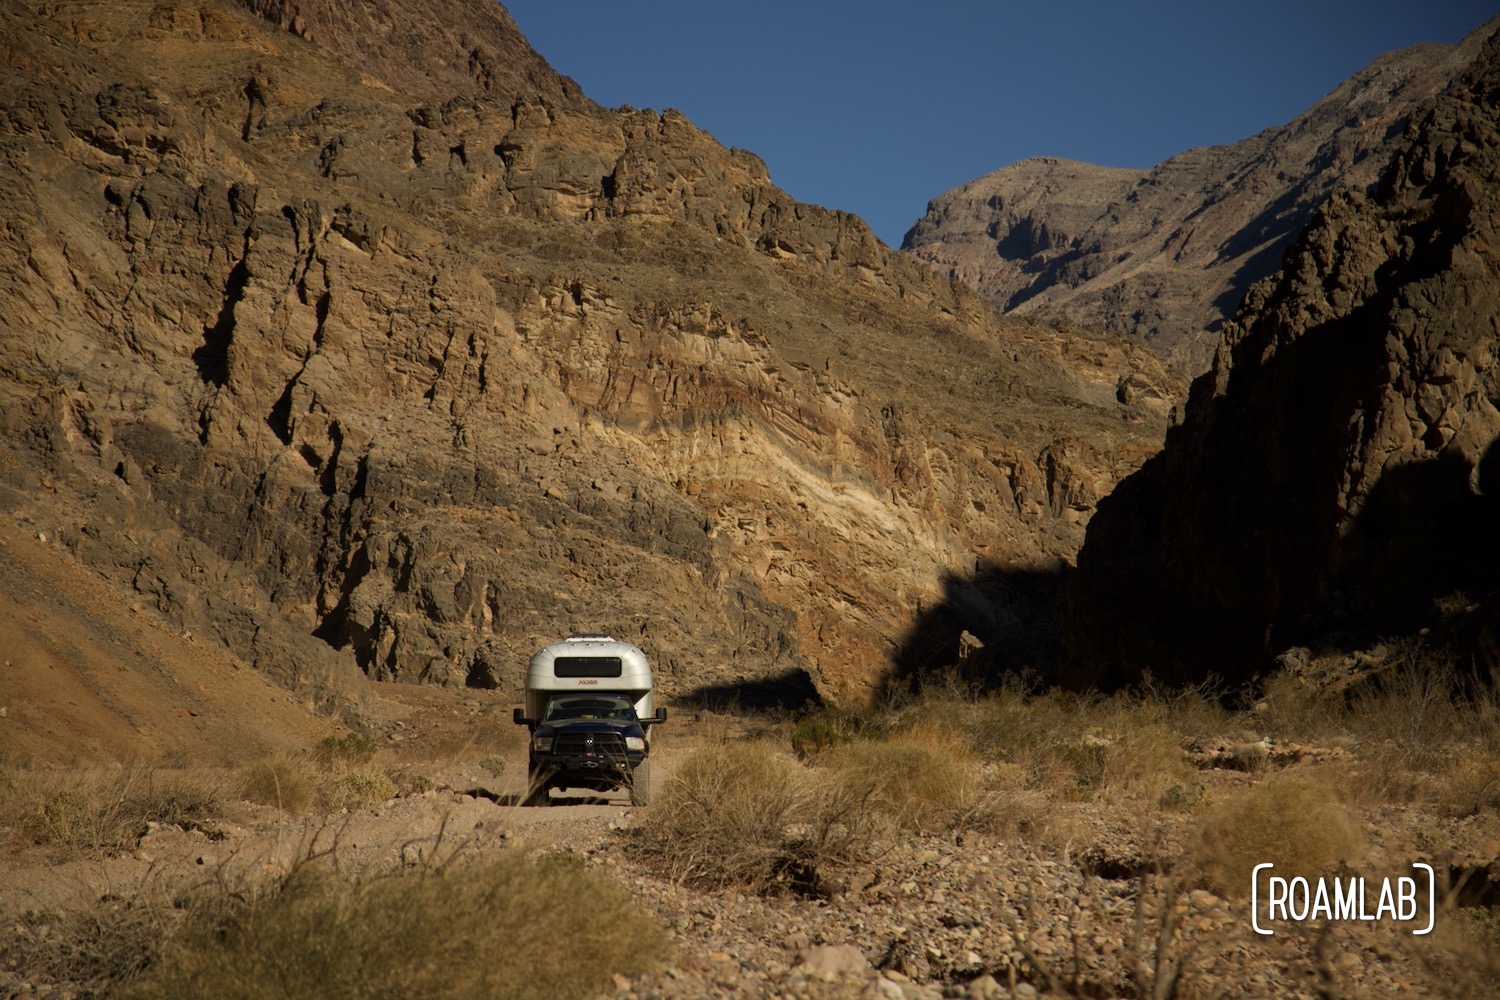 1970 Avion C11 truck camper swar following the dirt Titus Canyon Road in Death Valley National Park, California.